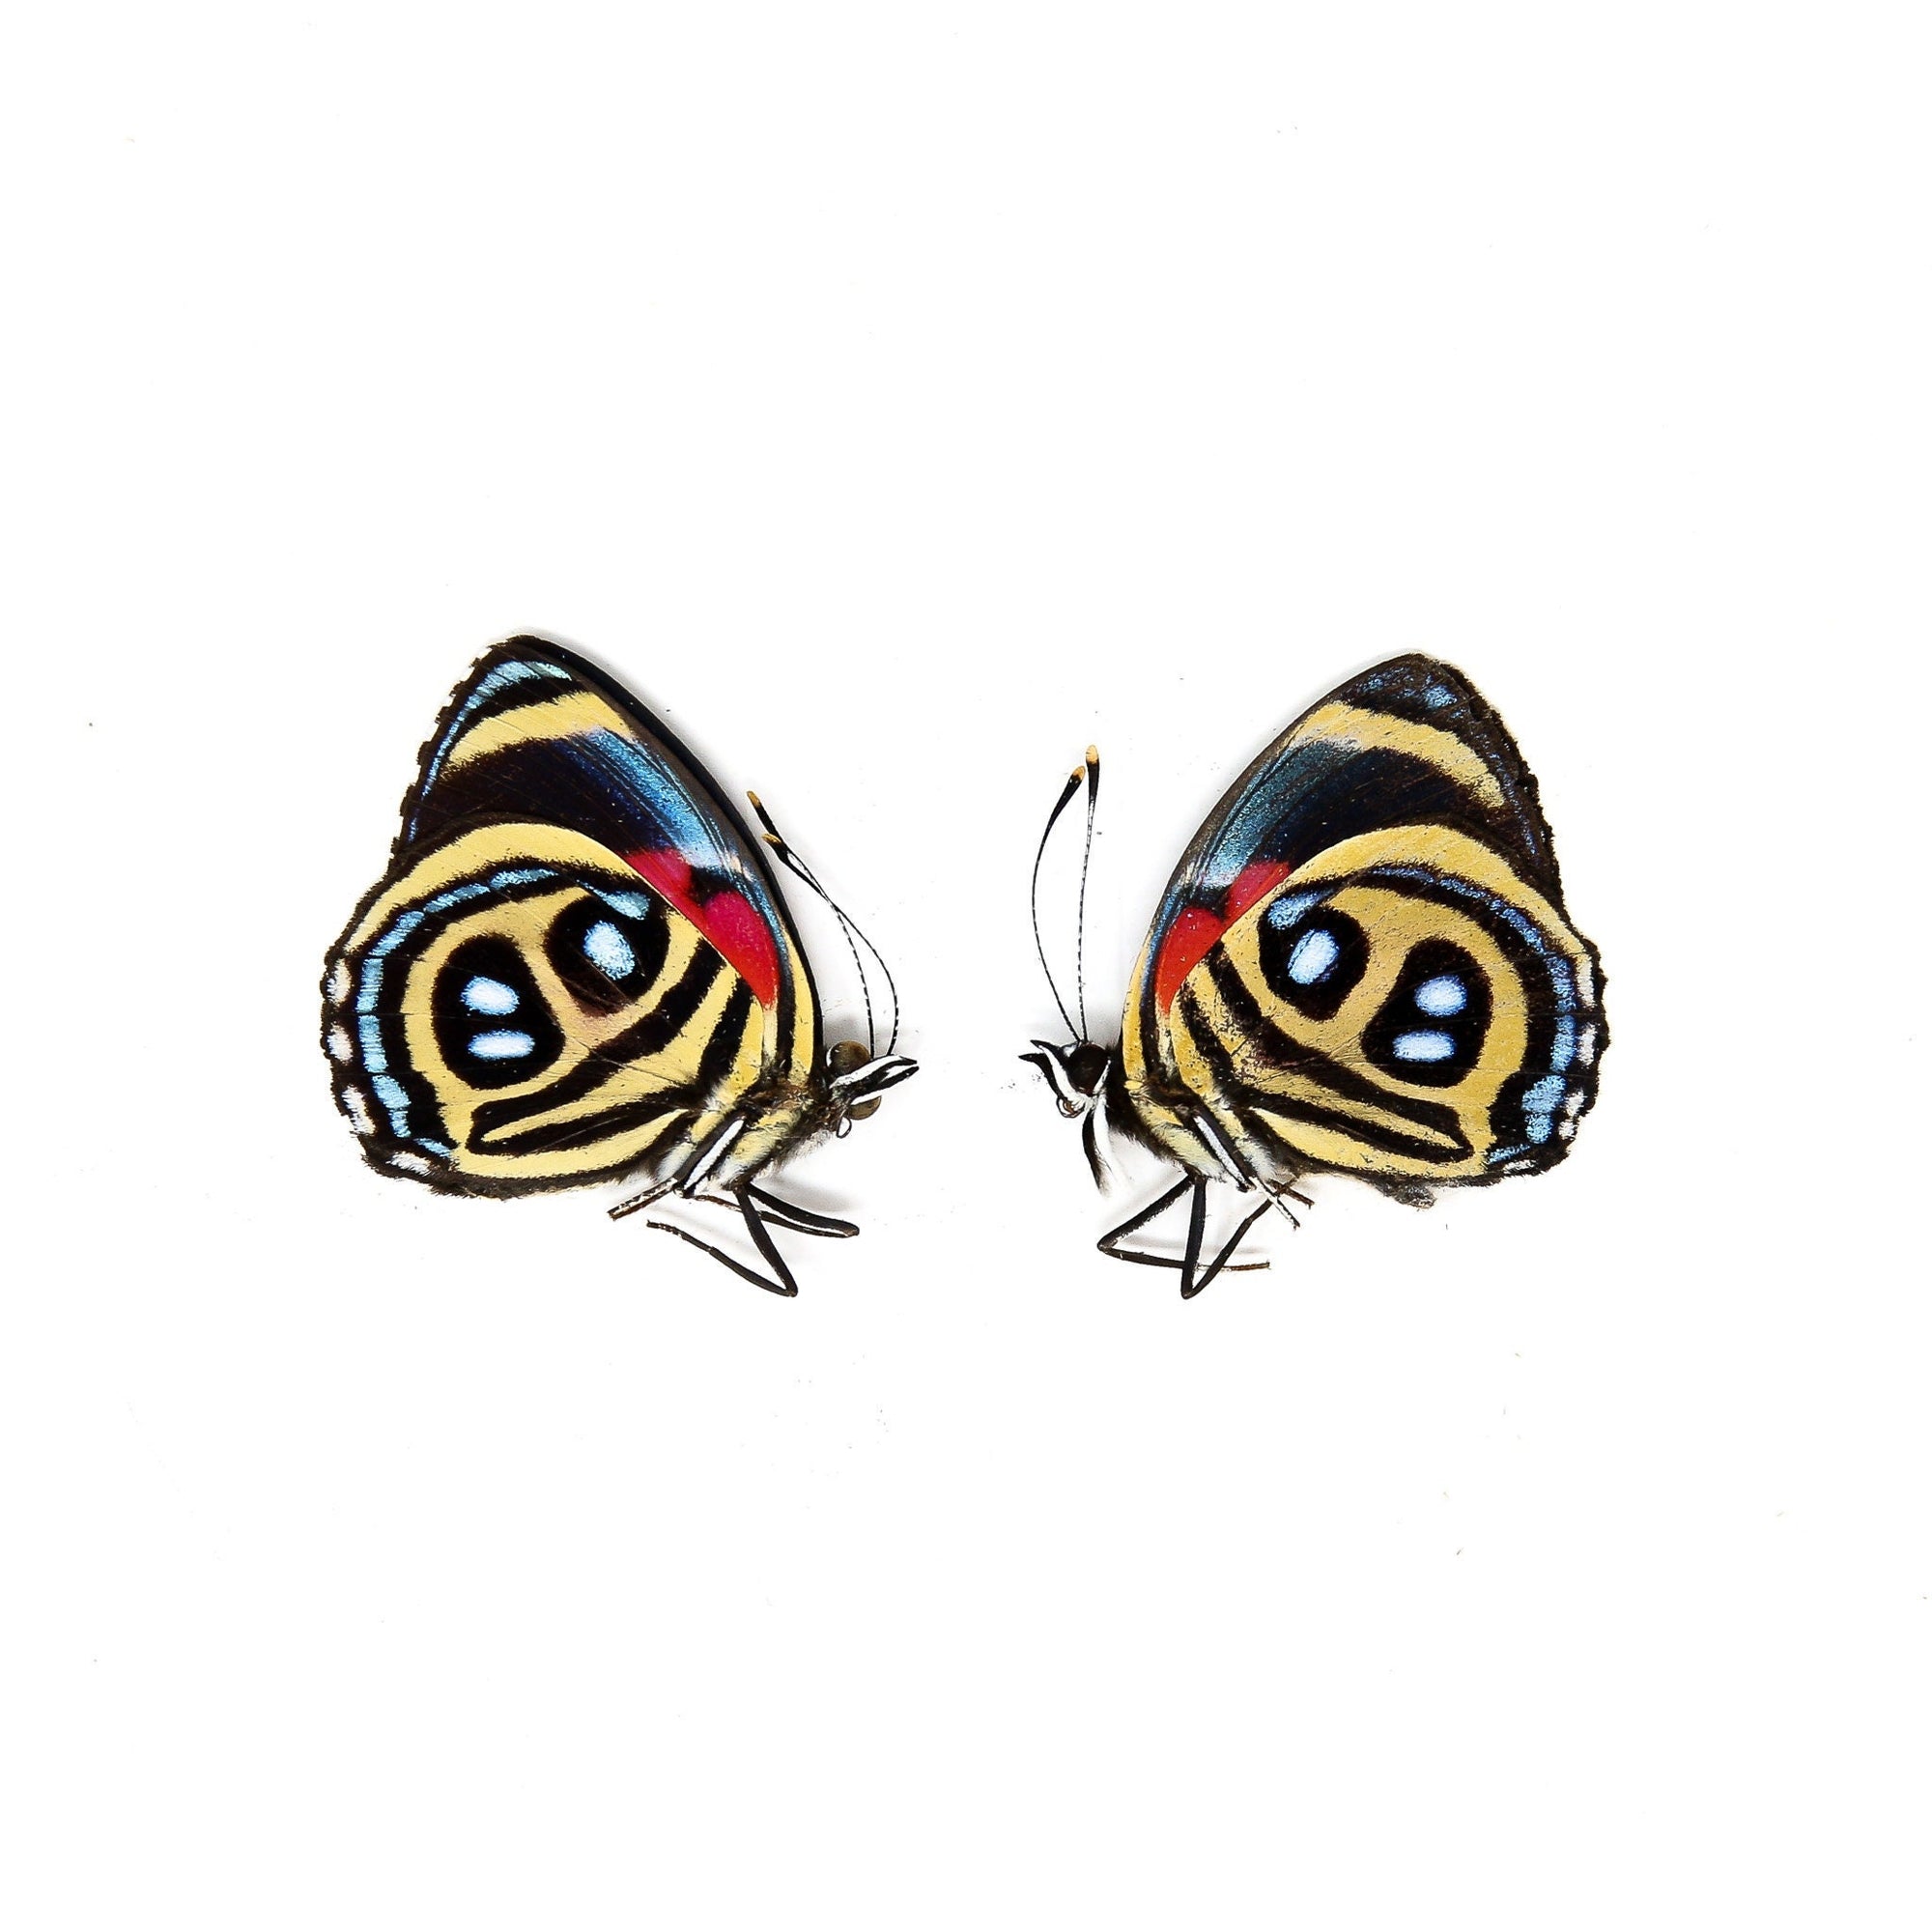 Two (2) Paulogramma peristera, A1 Real Dry-Preserved Butterflies, Unmounted Entomology Taxidermy Specimens